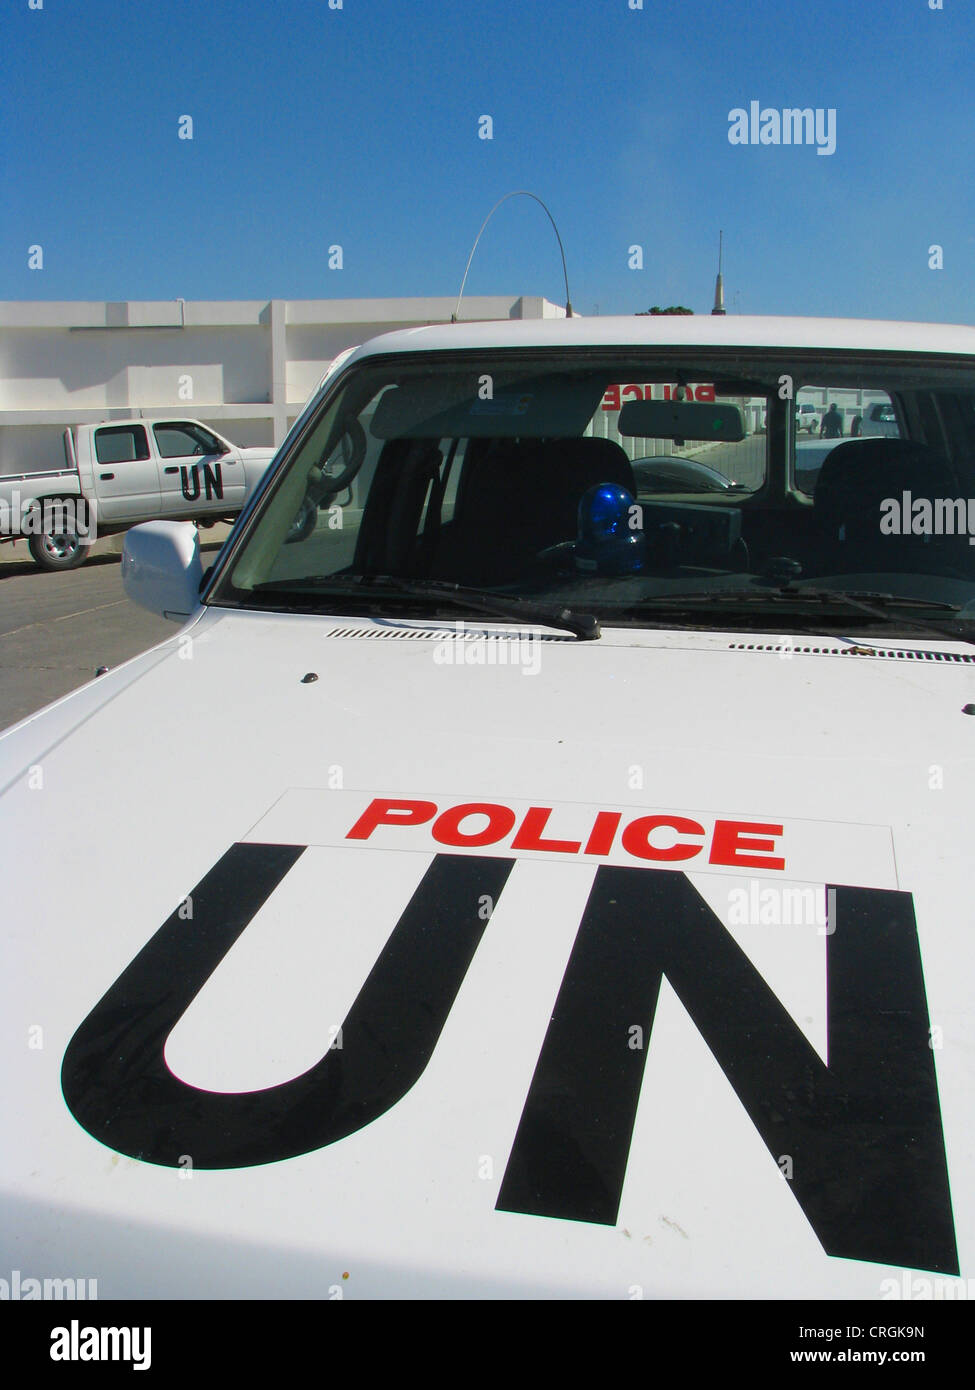 Four-wheel drive Vehicle of the United Nations police forces parking in the headquarter of the 'United Nations Stabilisation Mission in Haiti', Haiti, Provine de l'Ouest, Port-Au-Prince Stock Photo